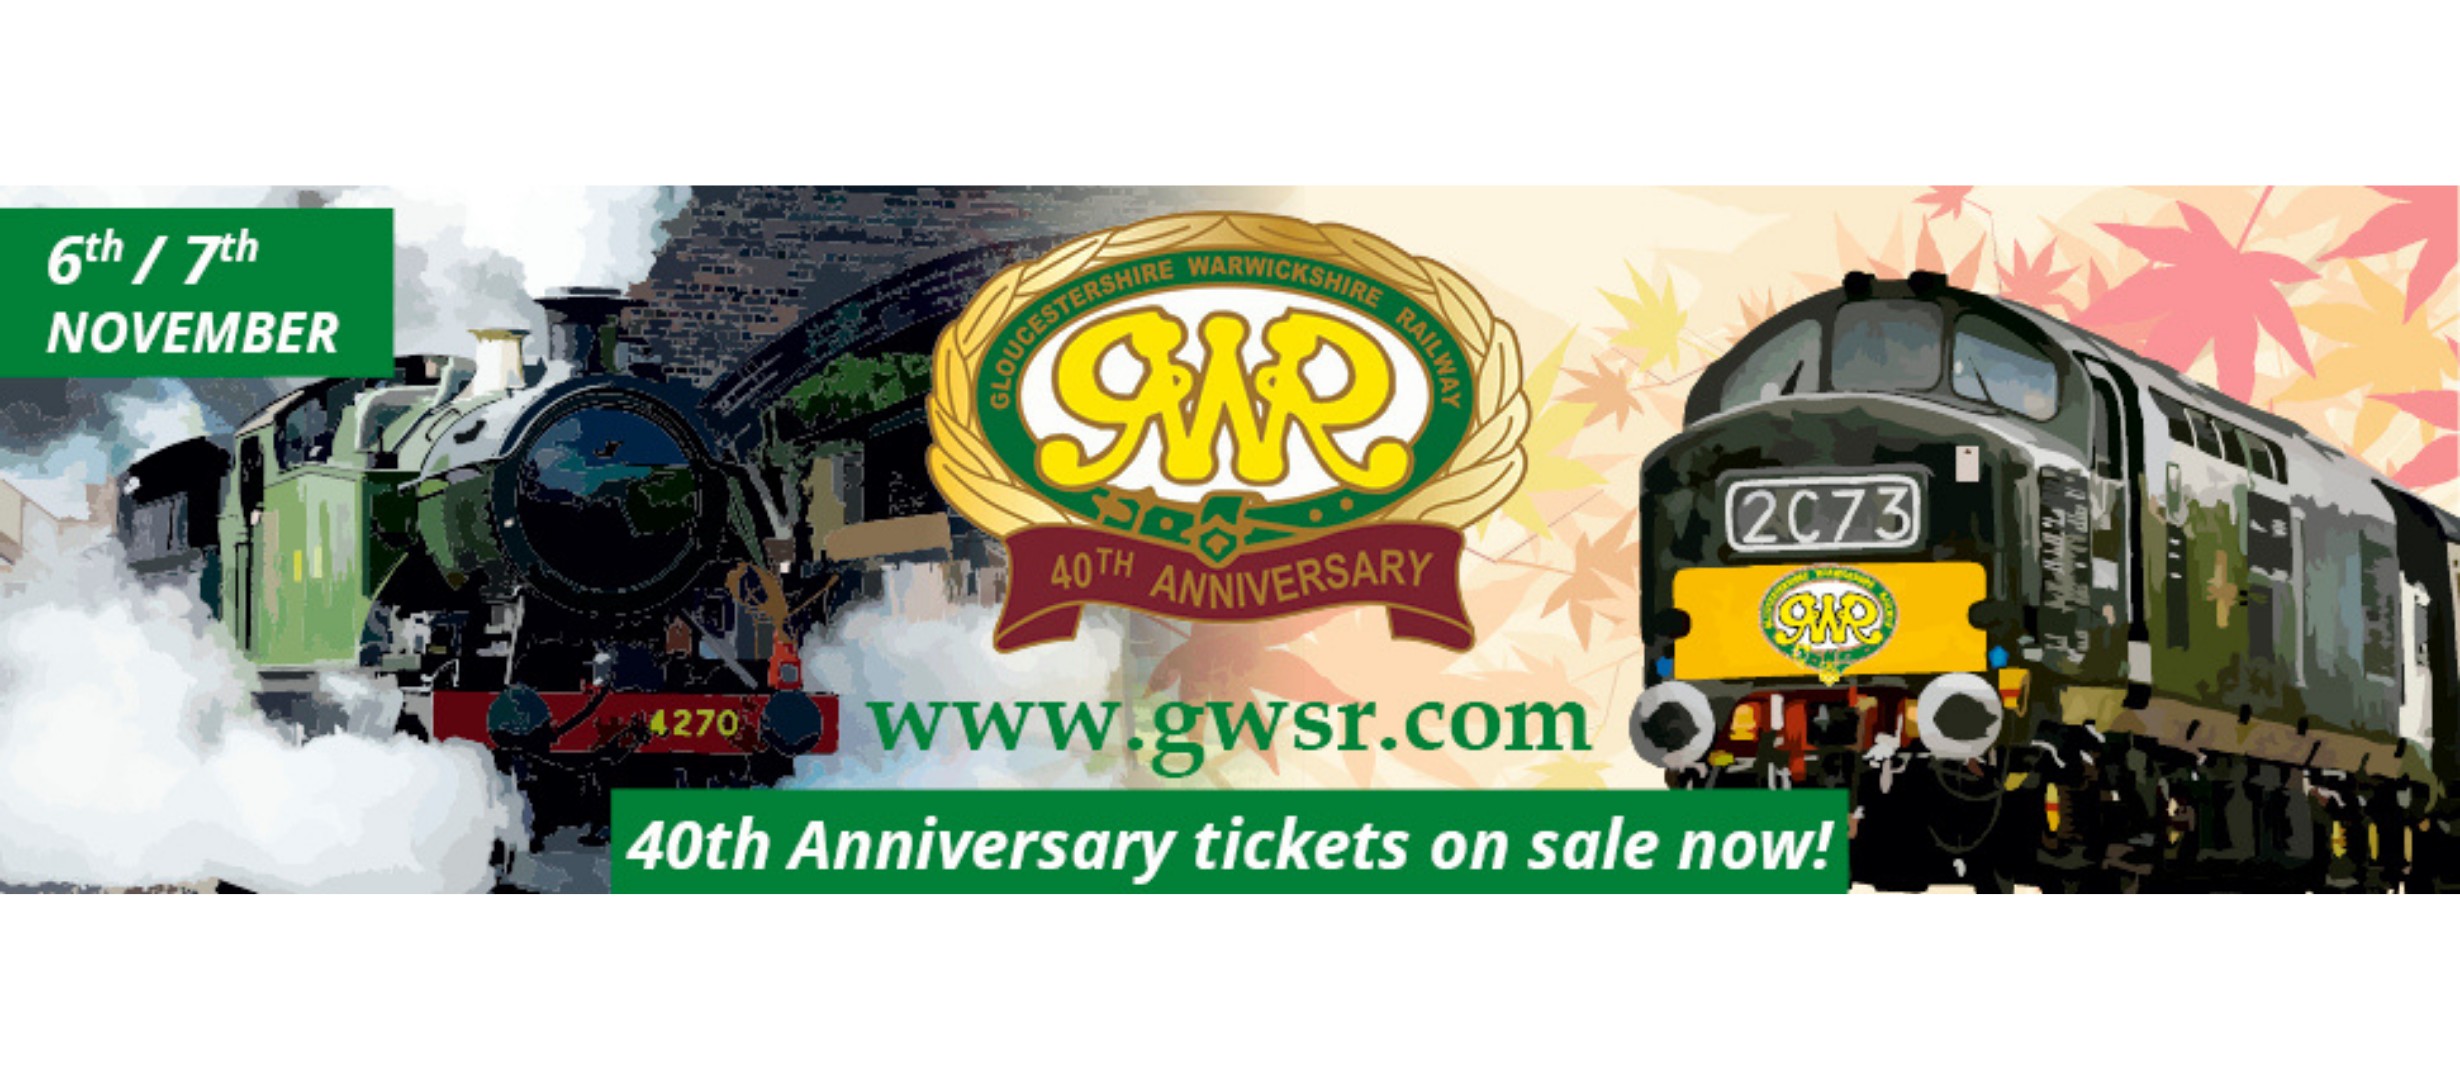 steam trains, text reads '6th/7th November.  40th anniversary tickets on sale now. www.gwsr.com